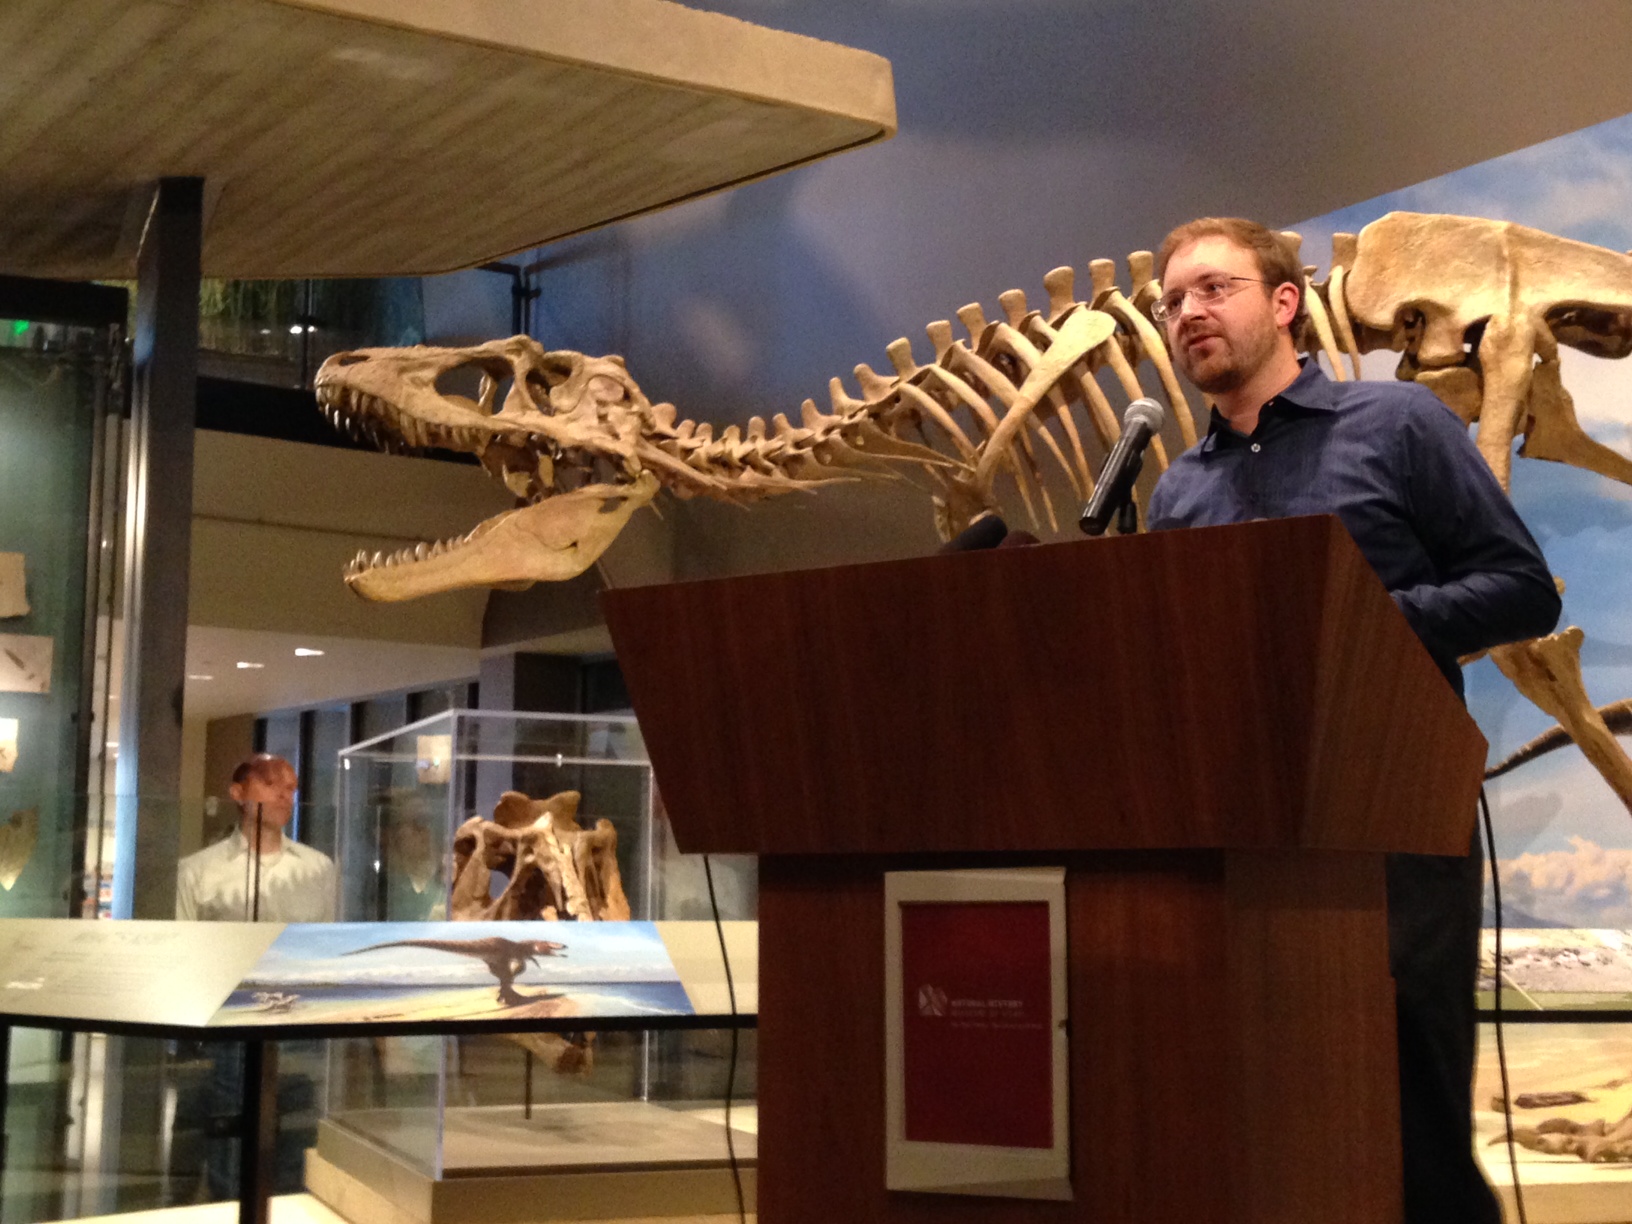 Dr. Randall Irmis speaks at a press conference at the Natural History Museum of Utah on November 6, 2013. Irmis and his team announced the discovery of a previously unknown dinosaur species.